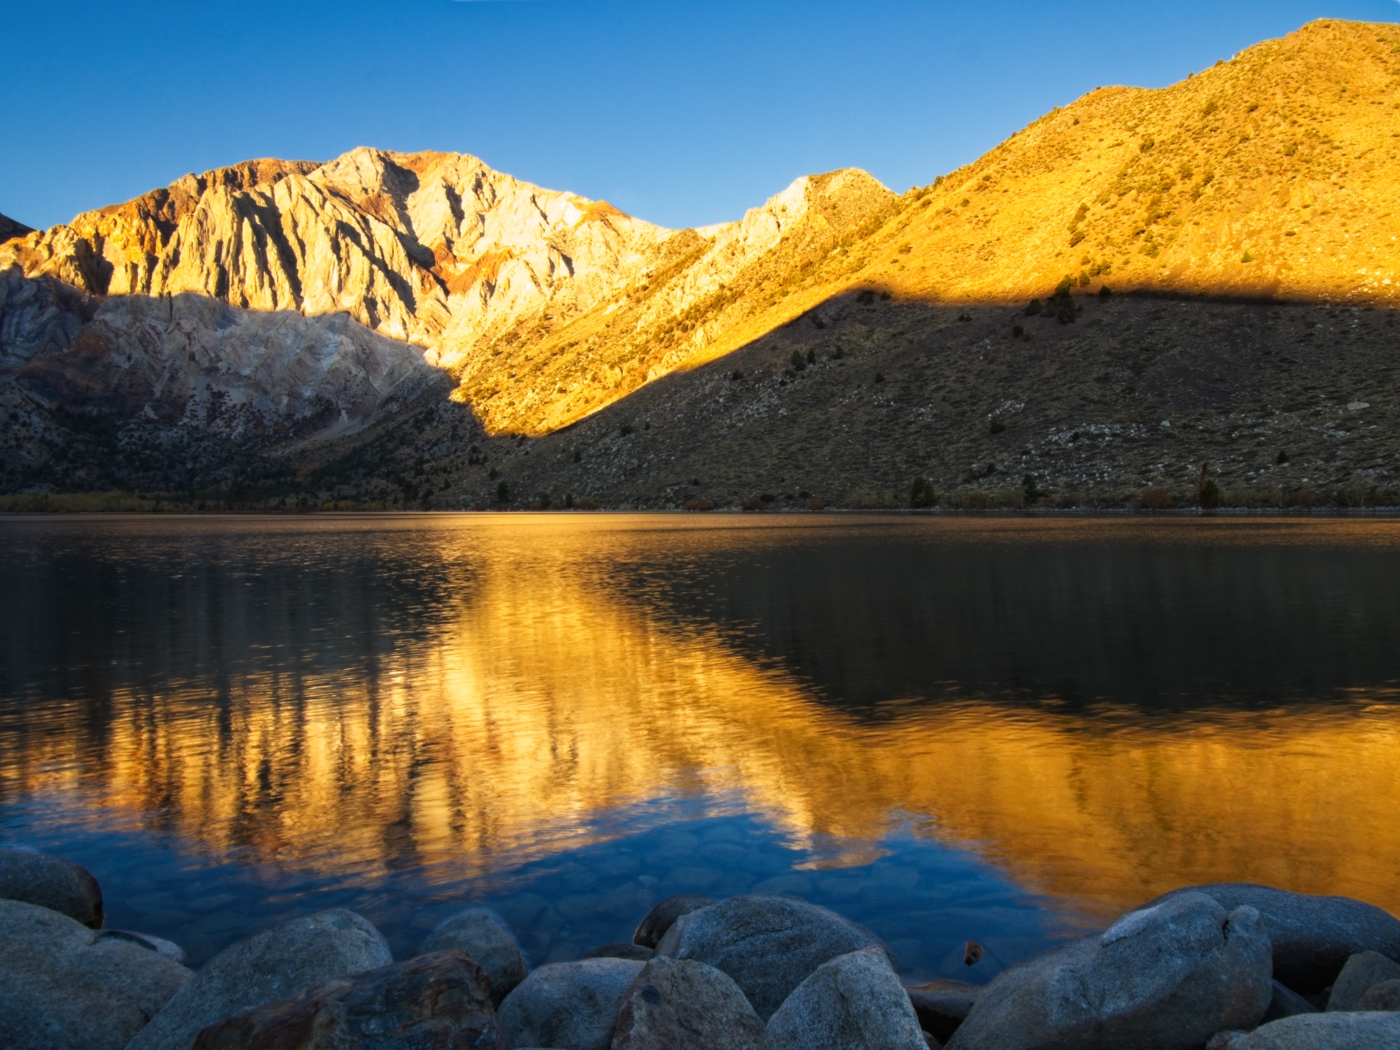 Sunrise on Convict Lake in the Eastern Sierra Nevada Mountains.